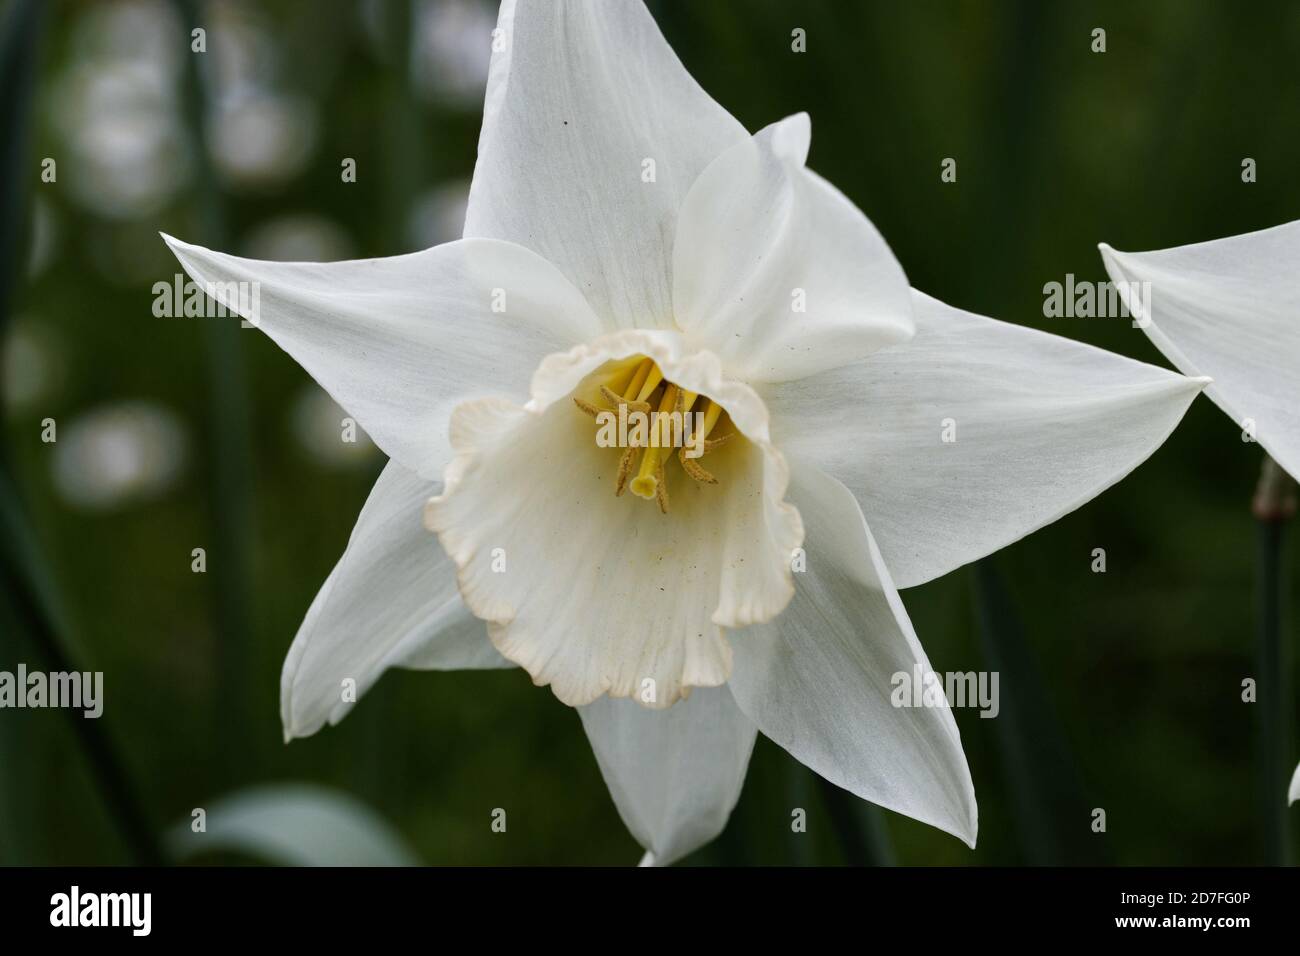 Narcissus is a genus of predominantly spring flowering perennial plants. Various common names include daffodil, narcissus and jonquil. Stock Photo